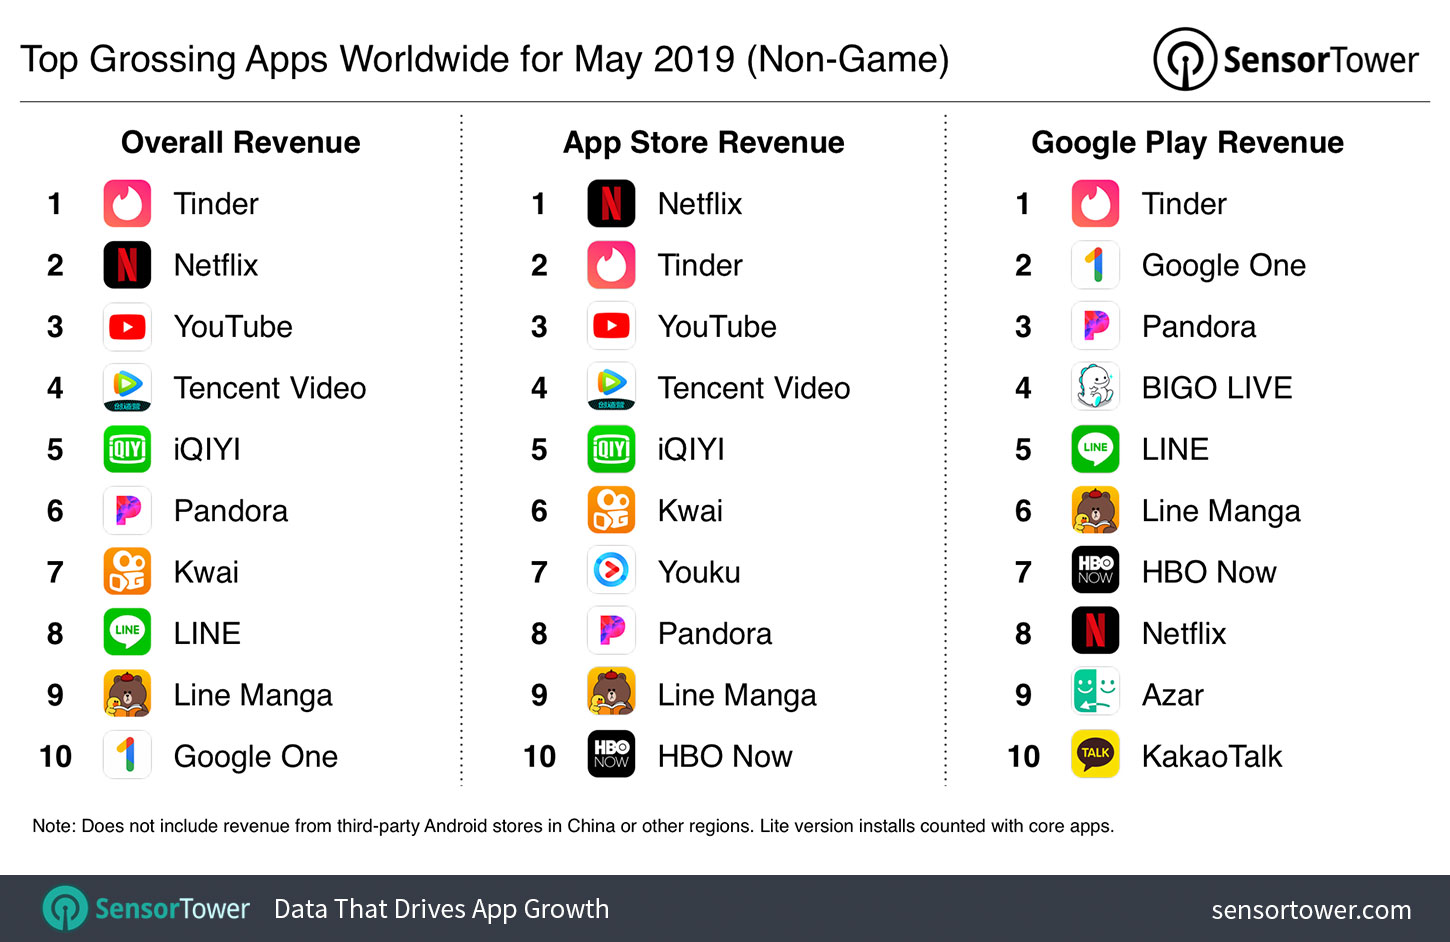 Top Grossing Apps Worldwide for May 2019